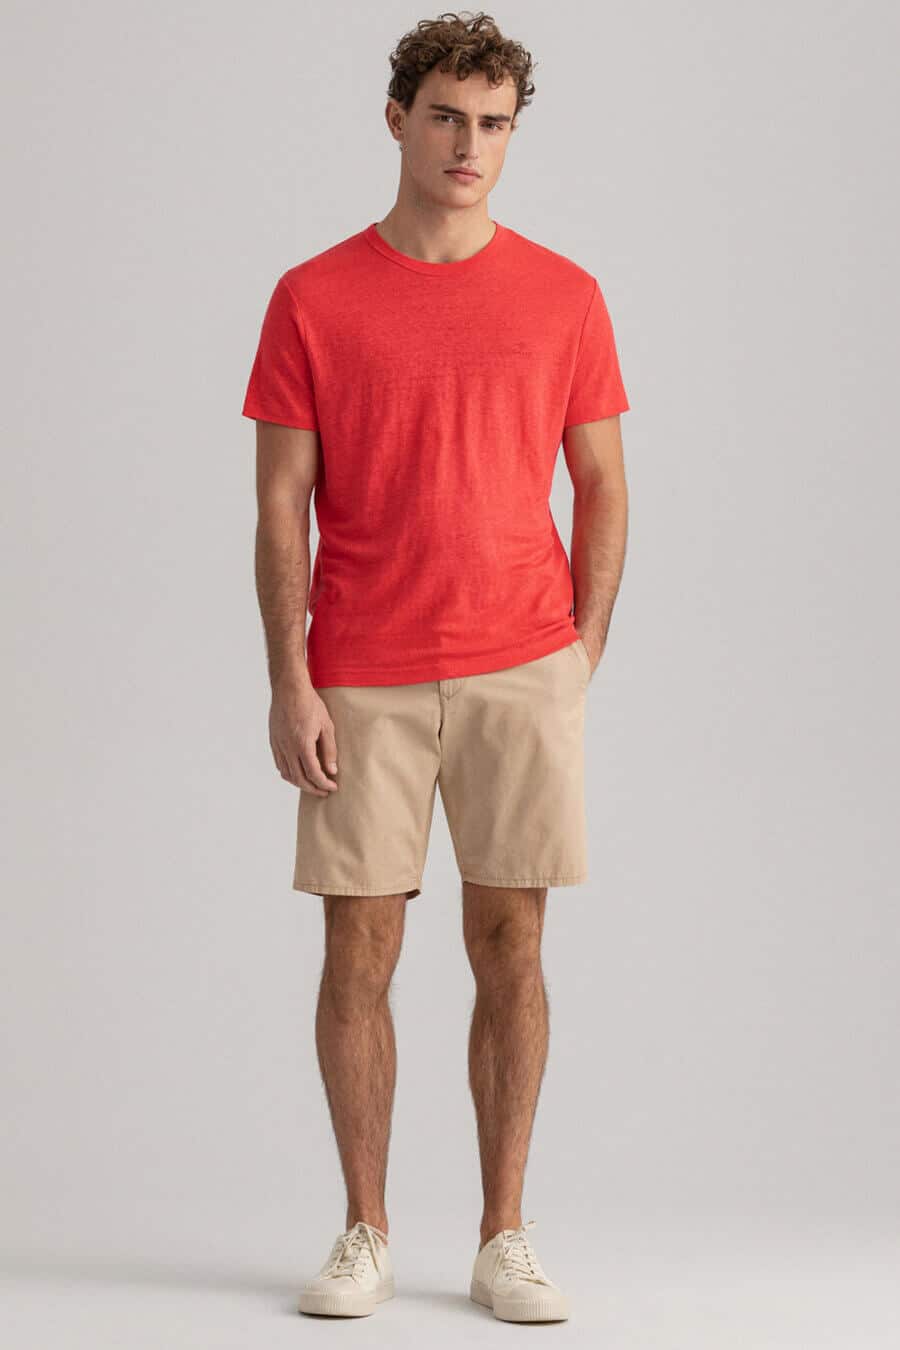 Men's red linen t-shirt with beige chino shorts and sneakers outfit